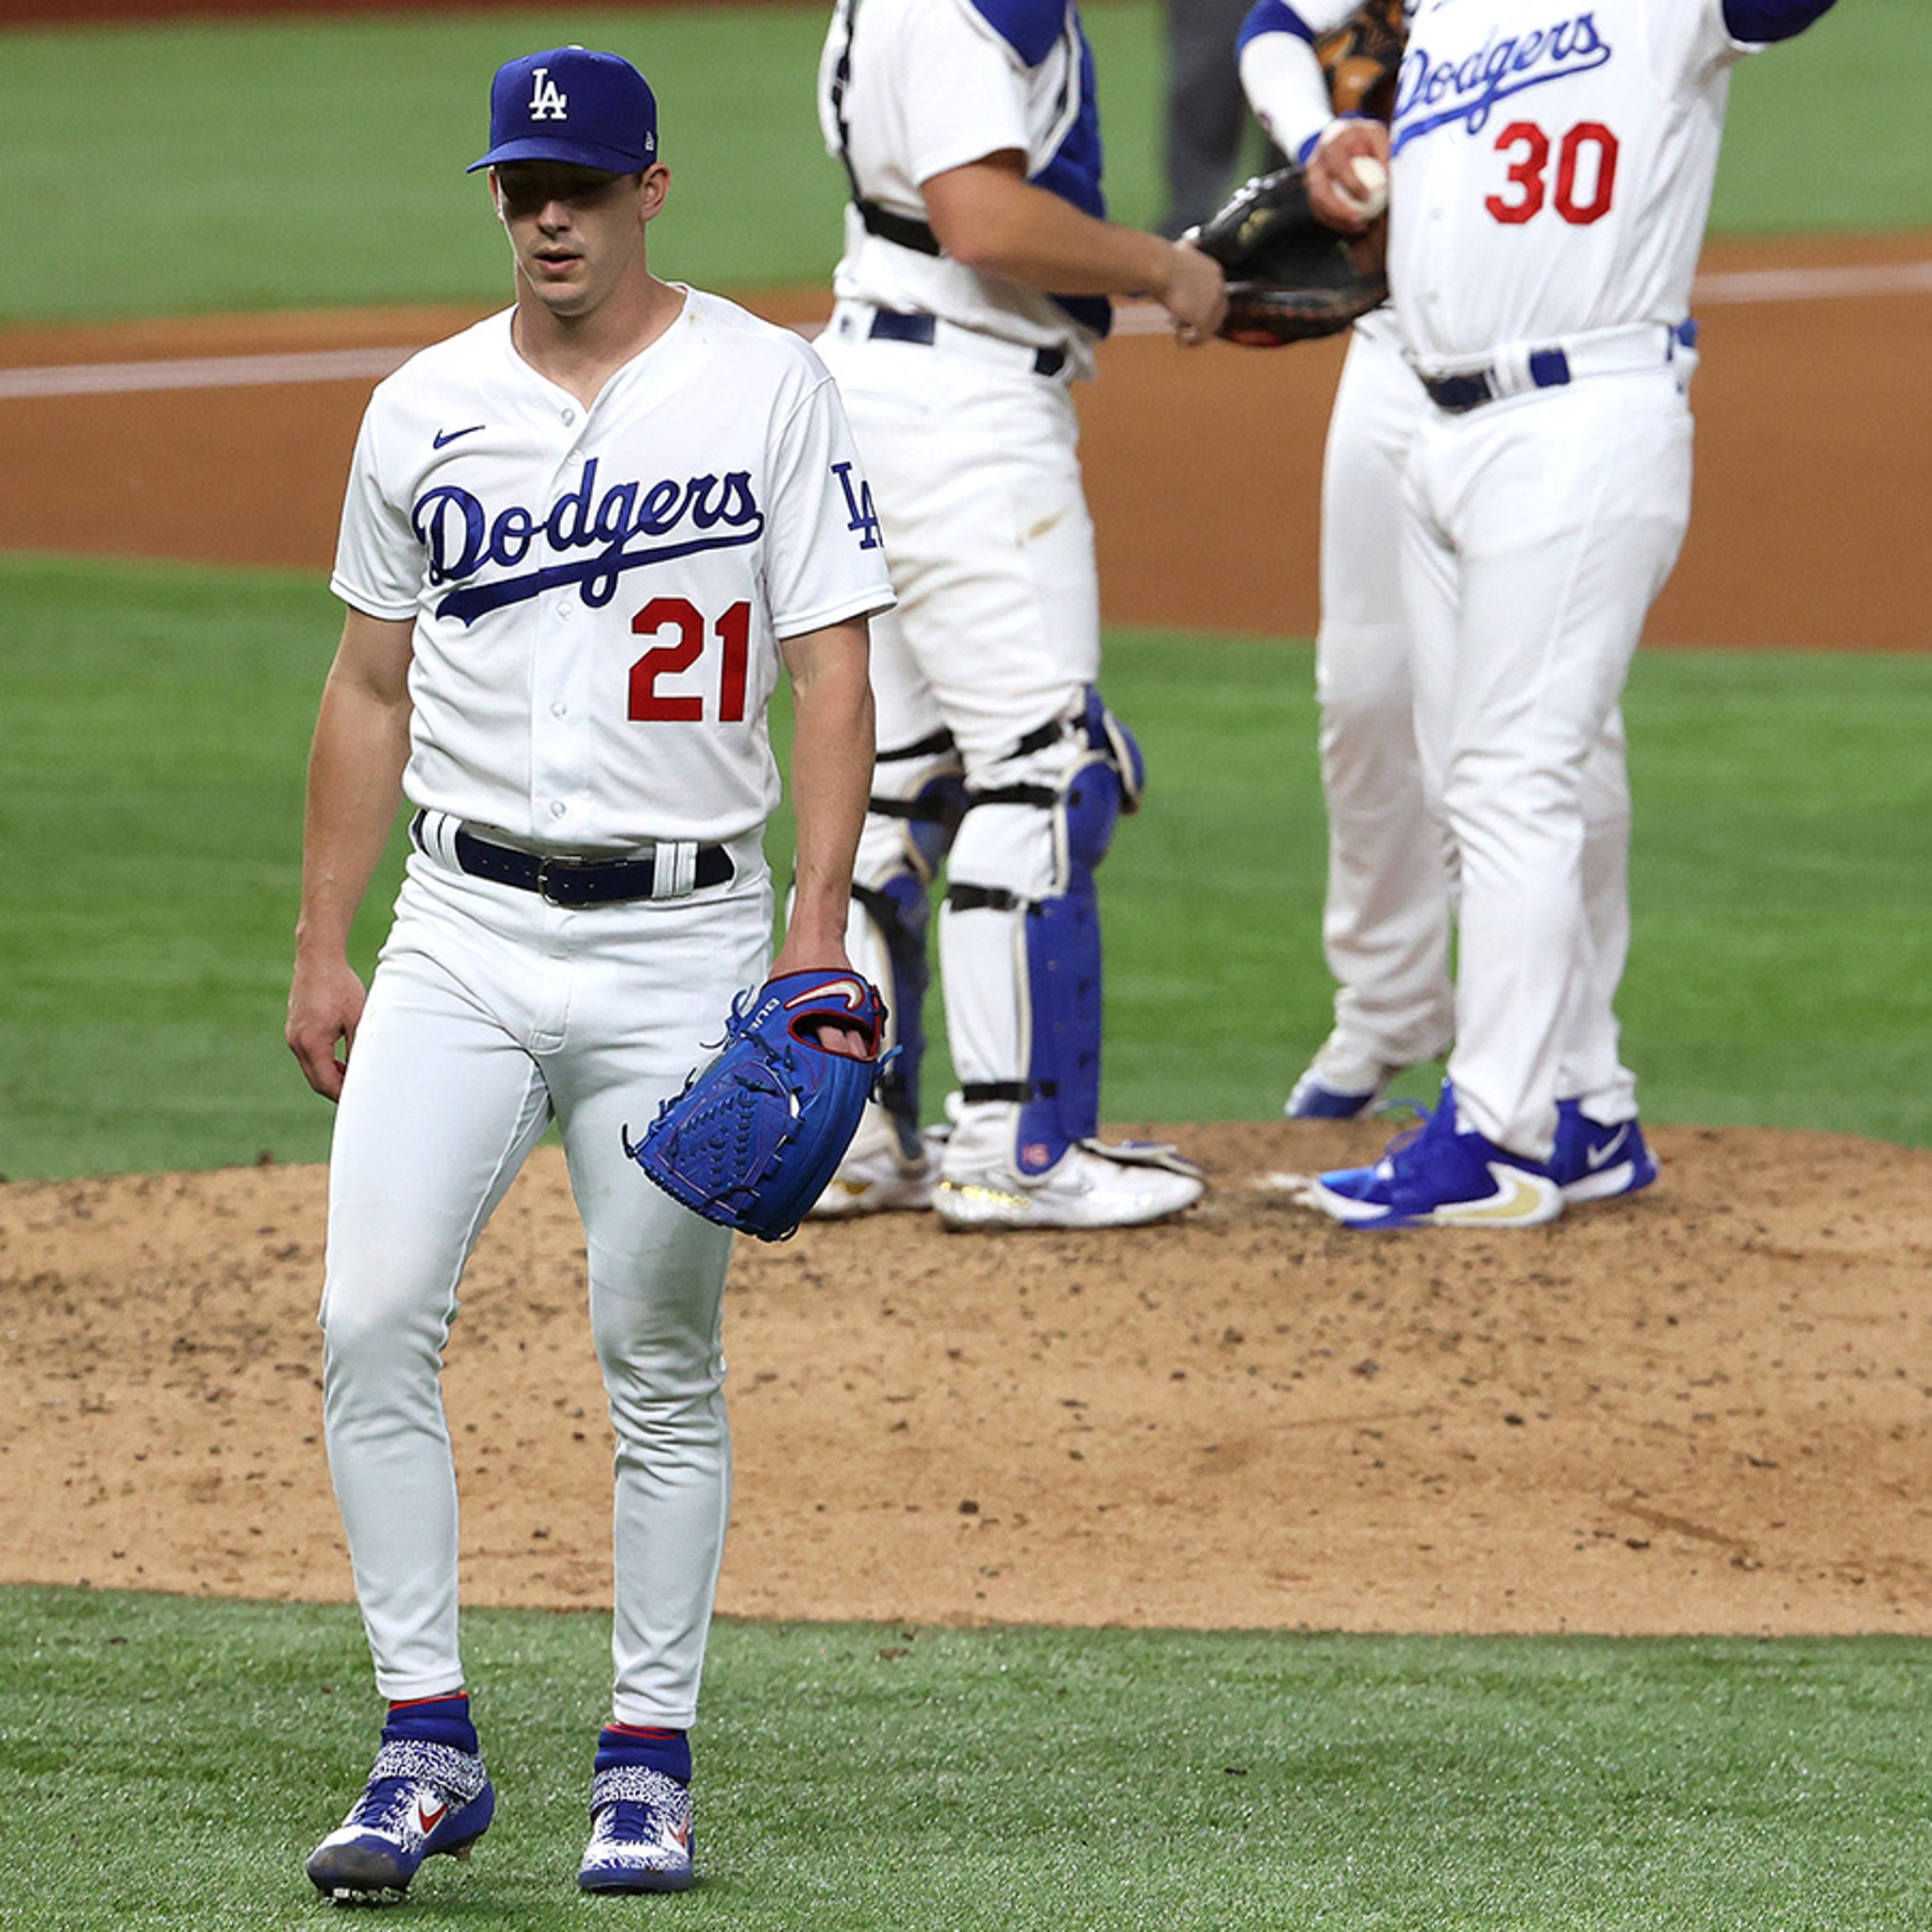 Twitter reacts to Dodgers pitcher Walker Buehler's very tight